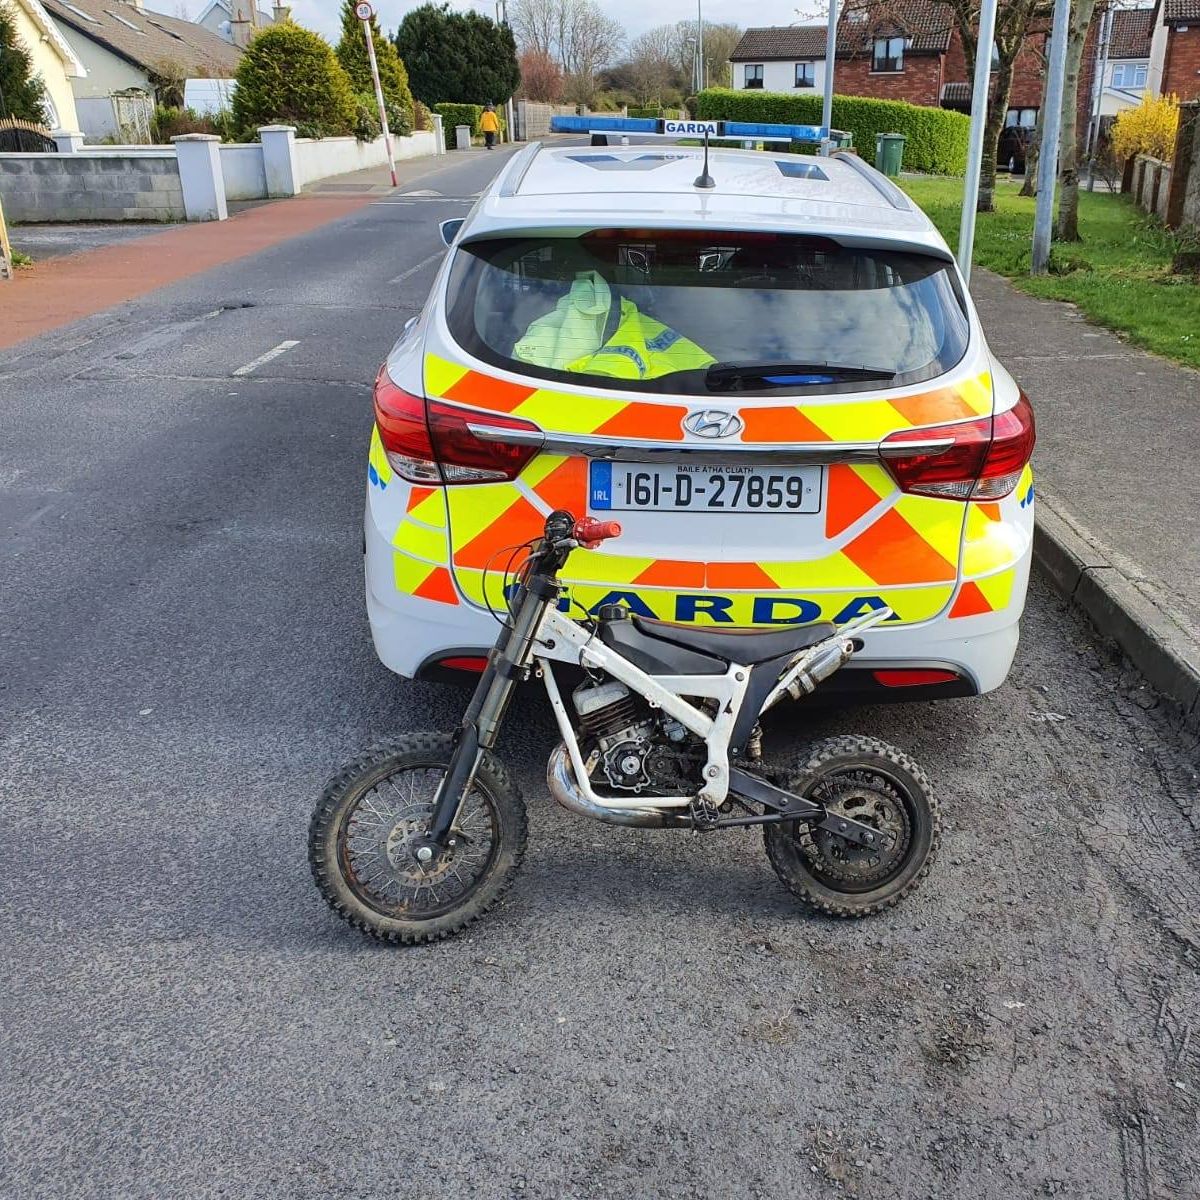 A view of a police car after having apprehended a scrambler from some Irish youth